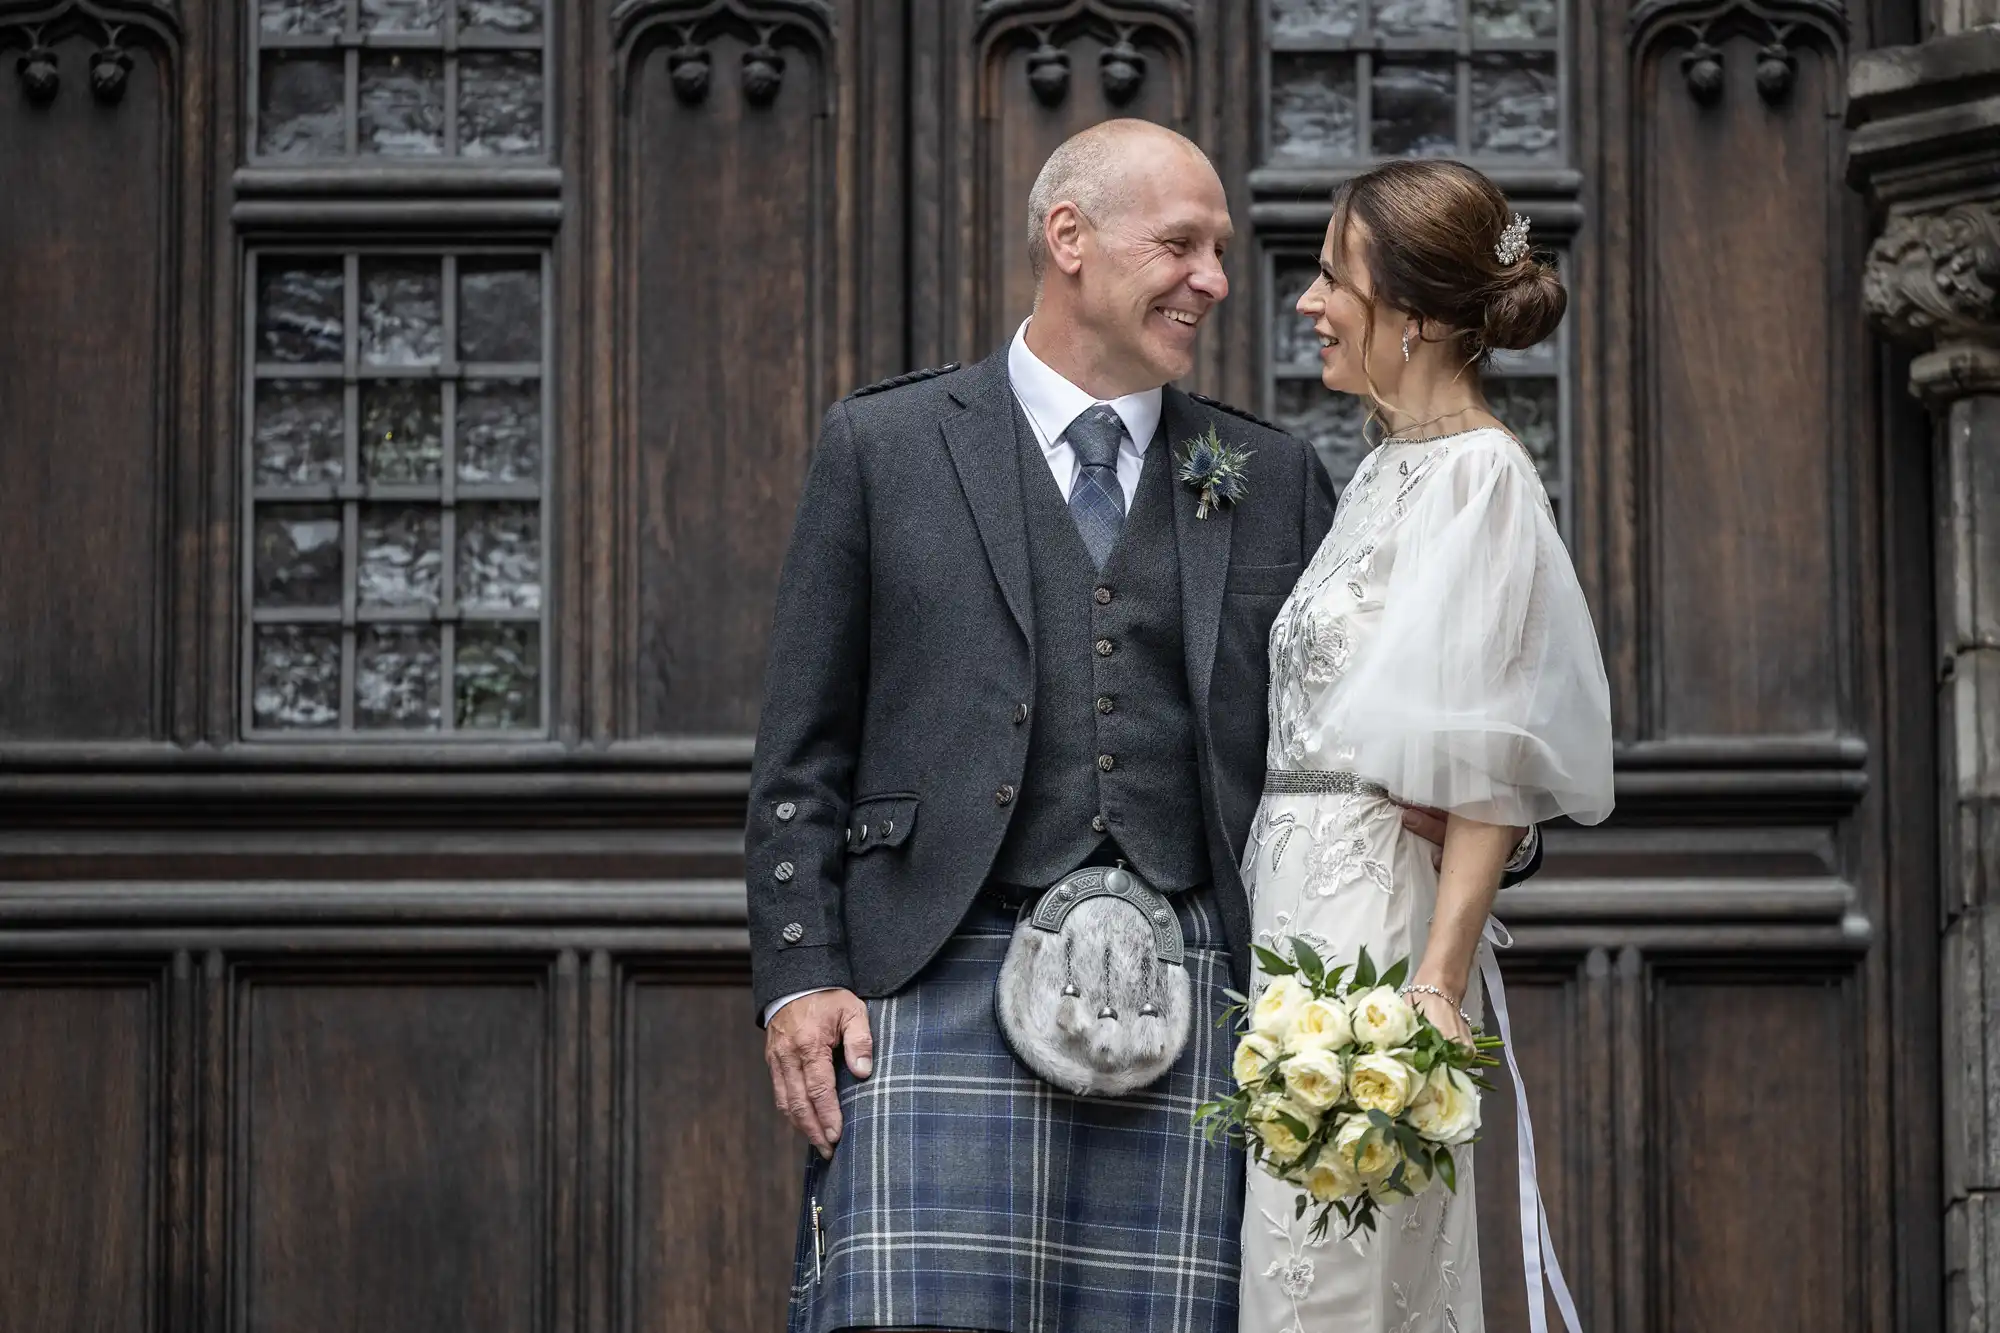 A couple dressed in formal attire, with the man in a kilt and jacket and the woman in a white dress holding a bouquet of flowers, smile at each other in front of a wooden door.